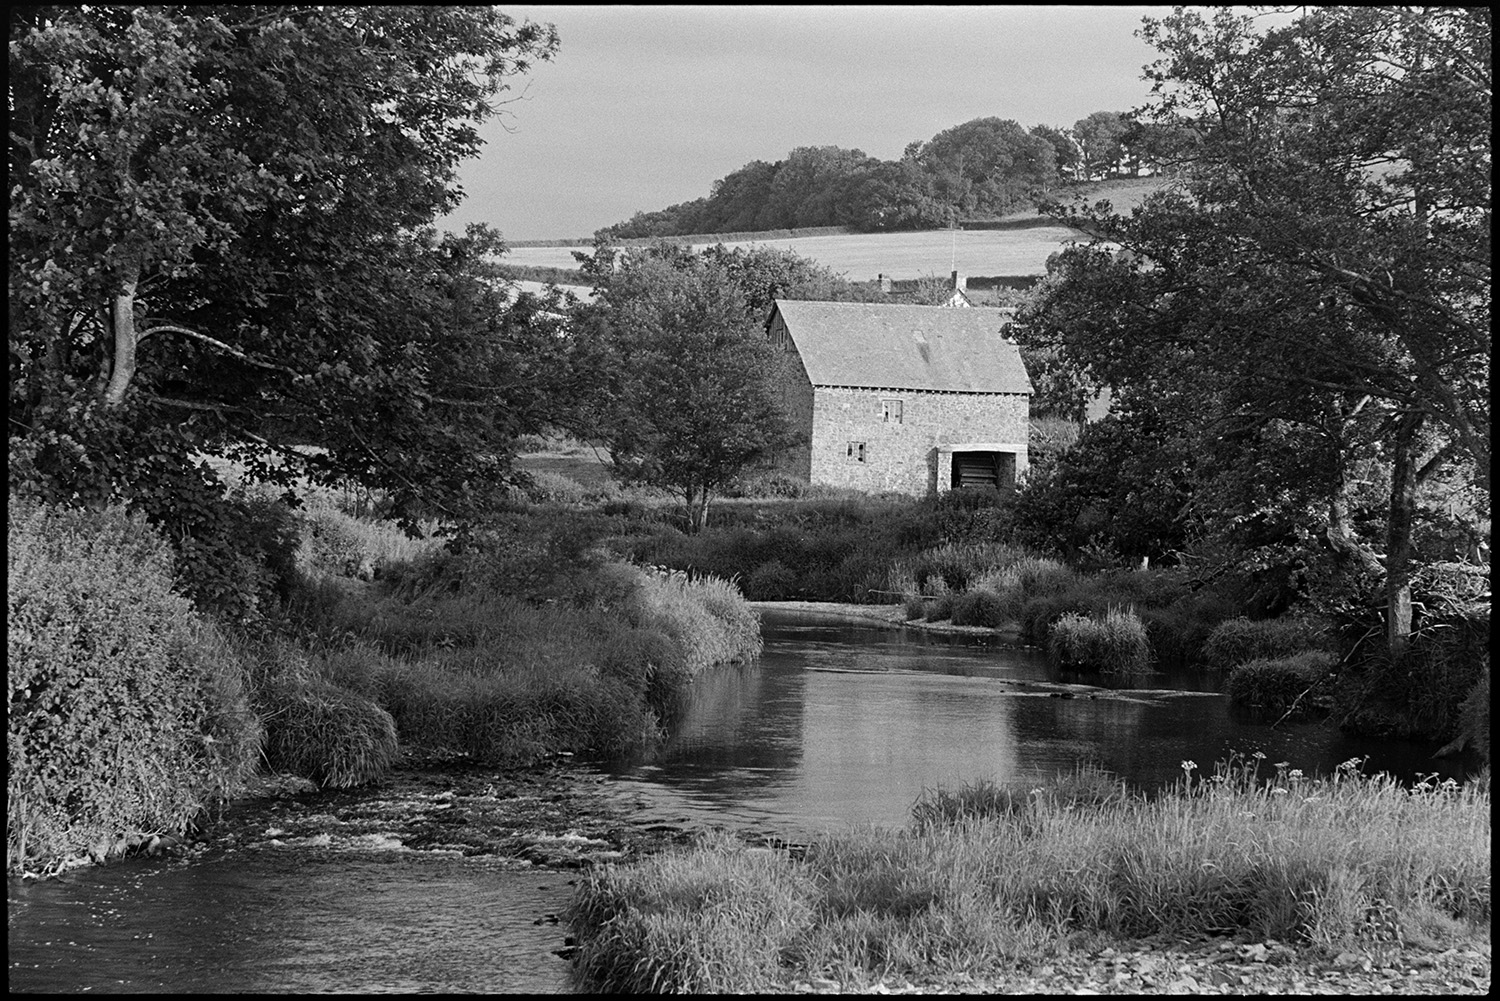 River view with old mill.
[A view of the River Taw and Rashleigh Mill surrounded by trees, near Bridge Reeve.]